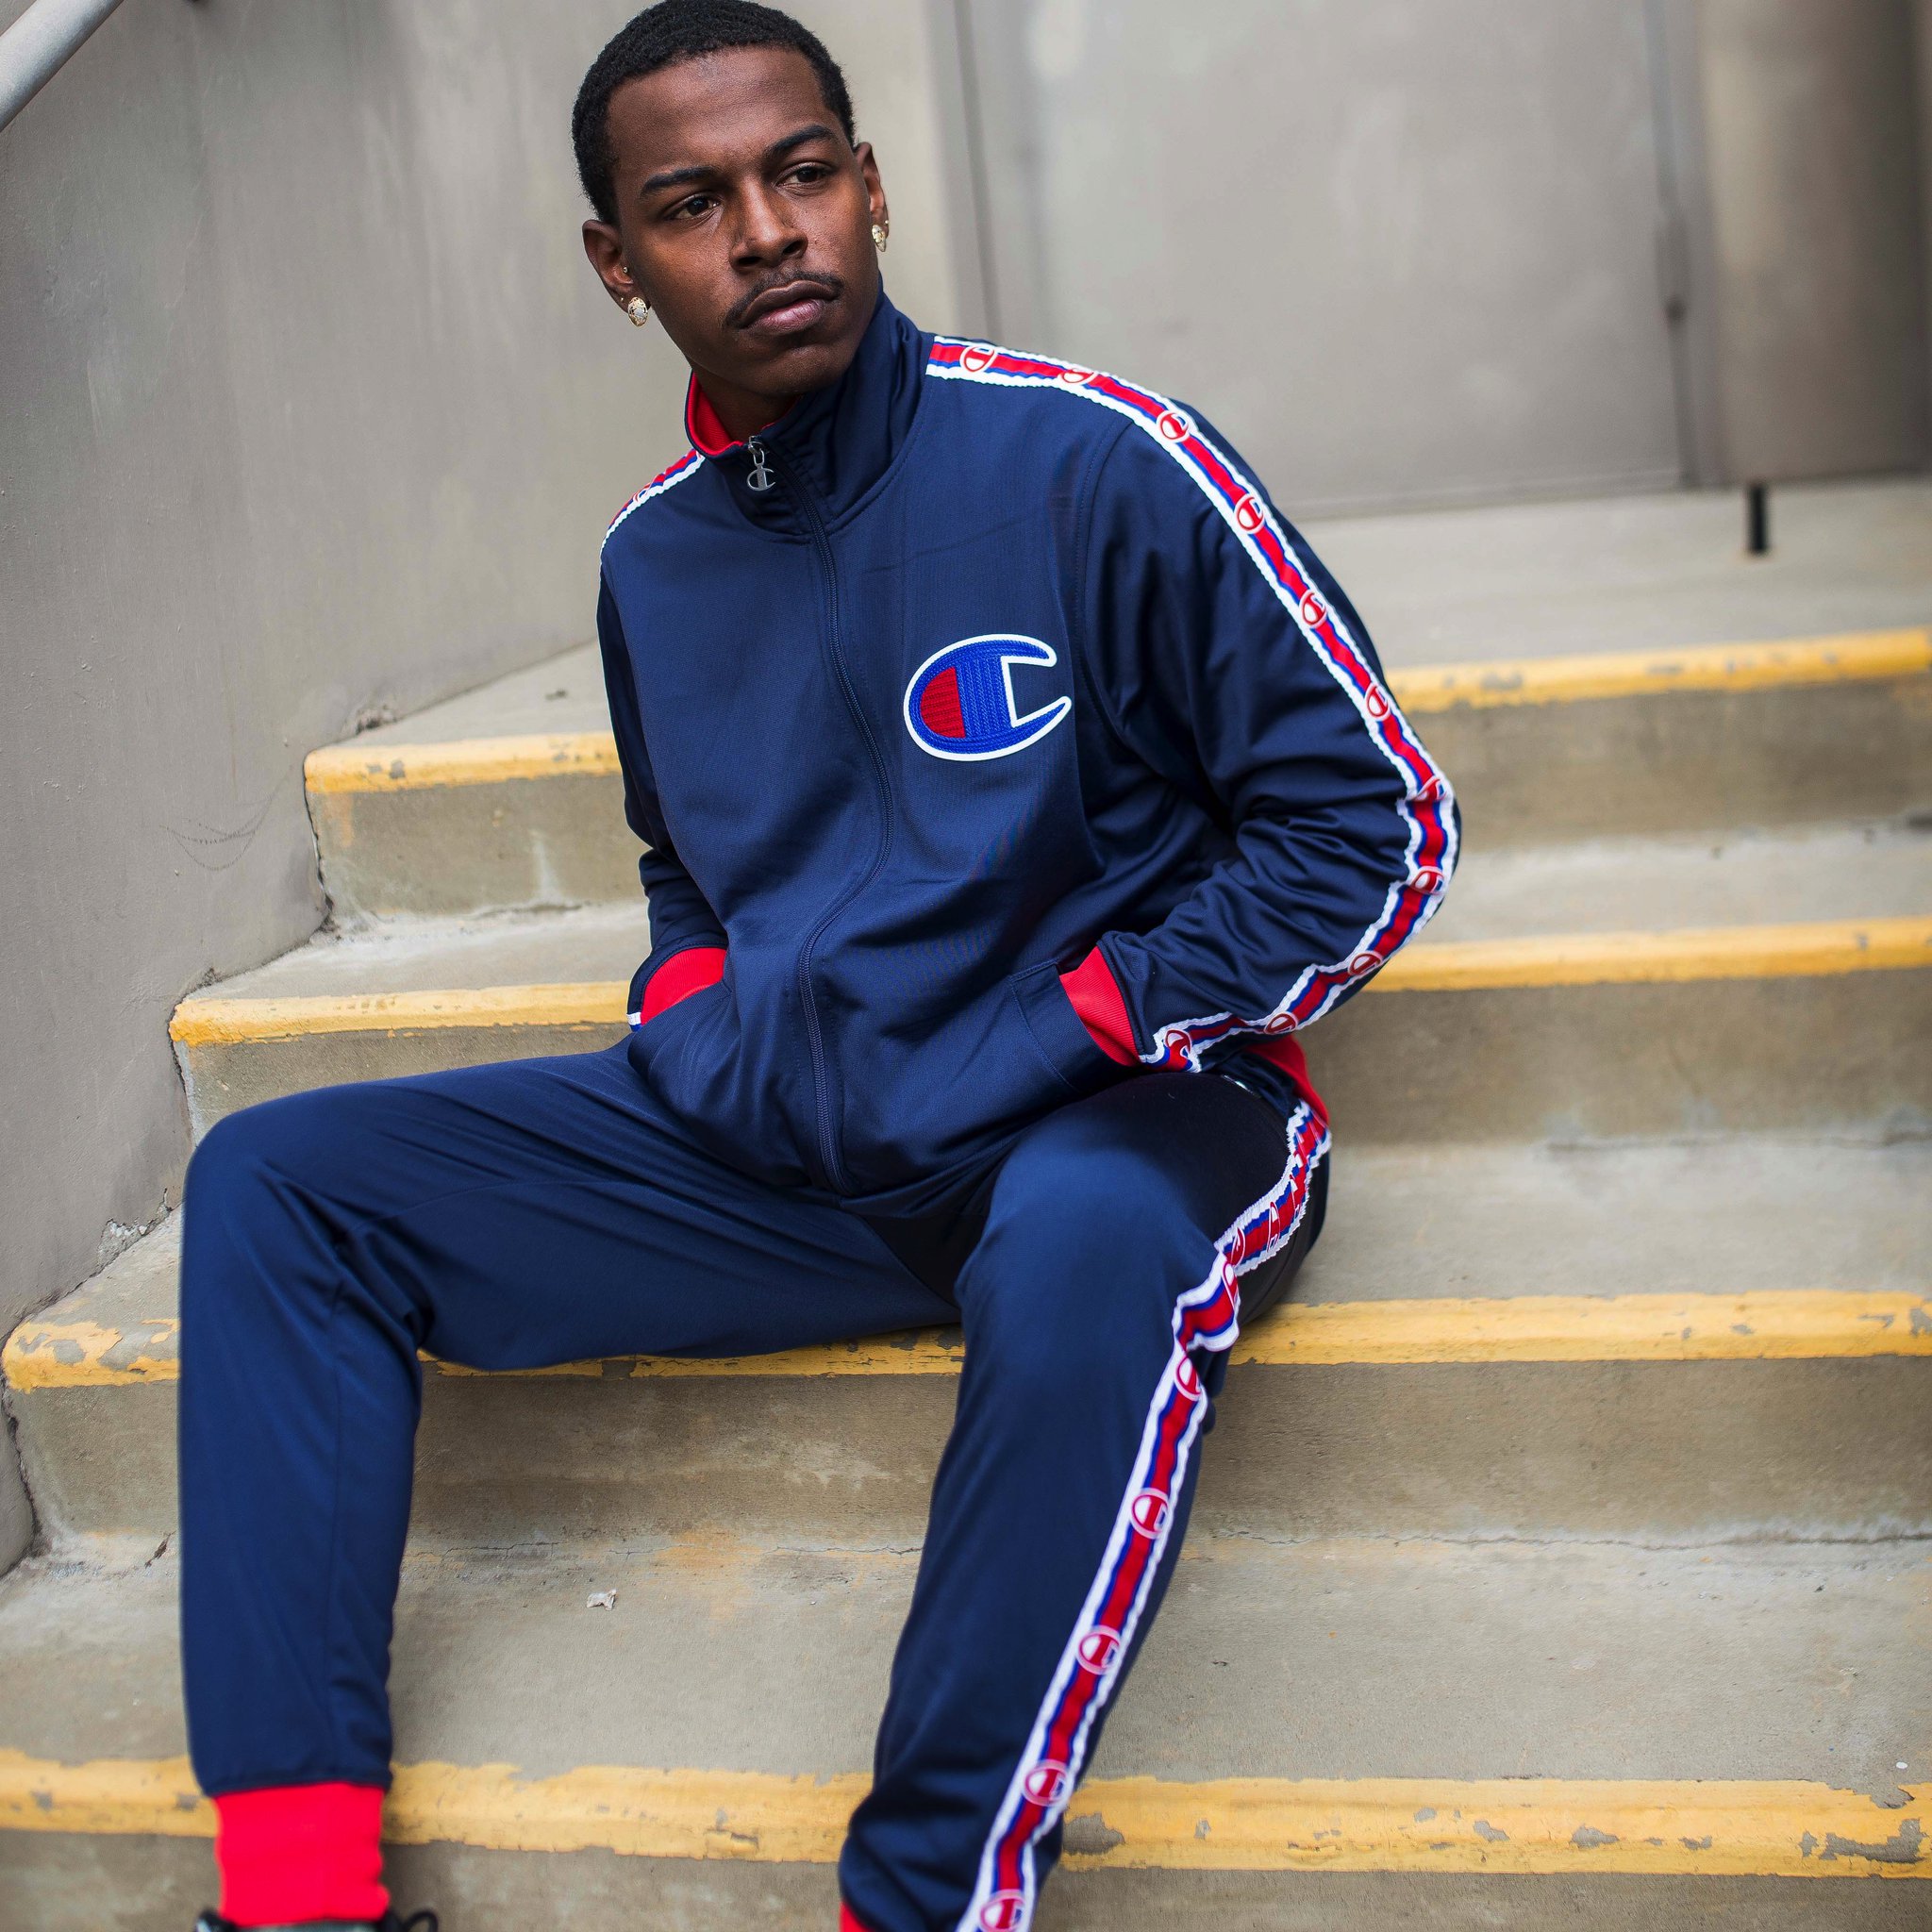 zondaar Overvloed eiwit Shiekh.com on Twitter: "Tracksuit style with #Champion . . . Click to shop:  Jacket: https://t.co/zQAUbdwQUD Pants: https://t.co/ADl1rF2x0D #Champion # Tracksuit #StreetStyle #Fashion #coppedatshiekh https://t.co/p4lpDiYKHU" / X